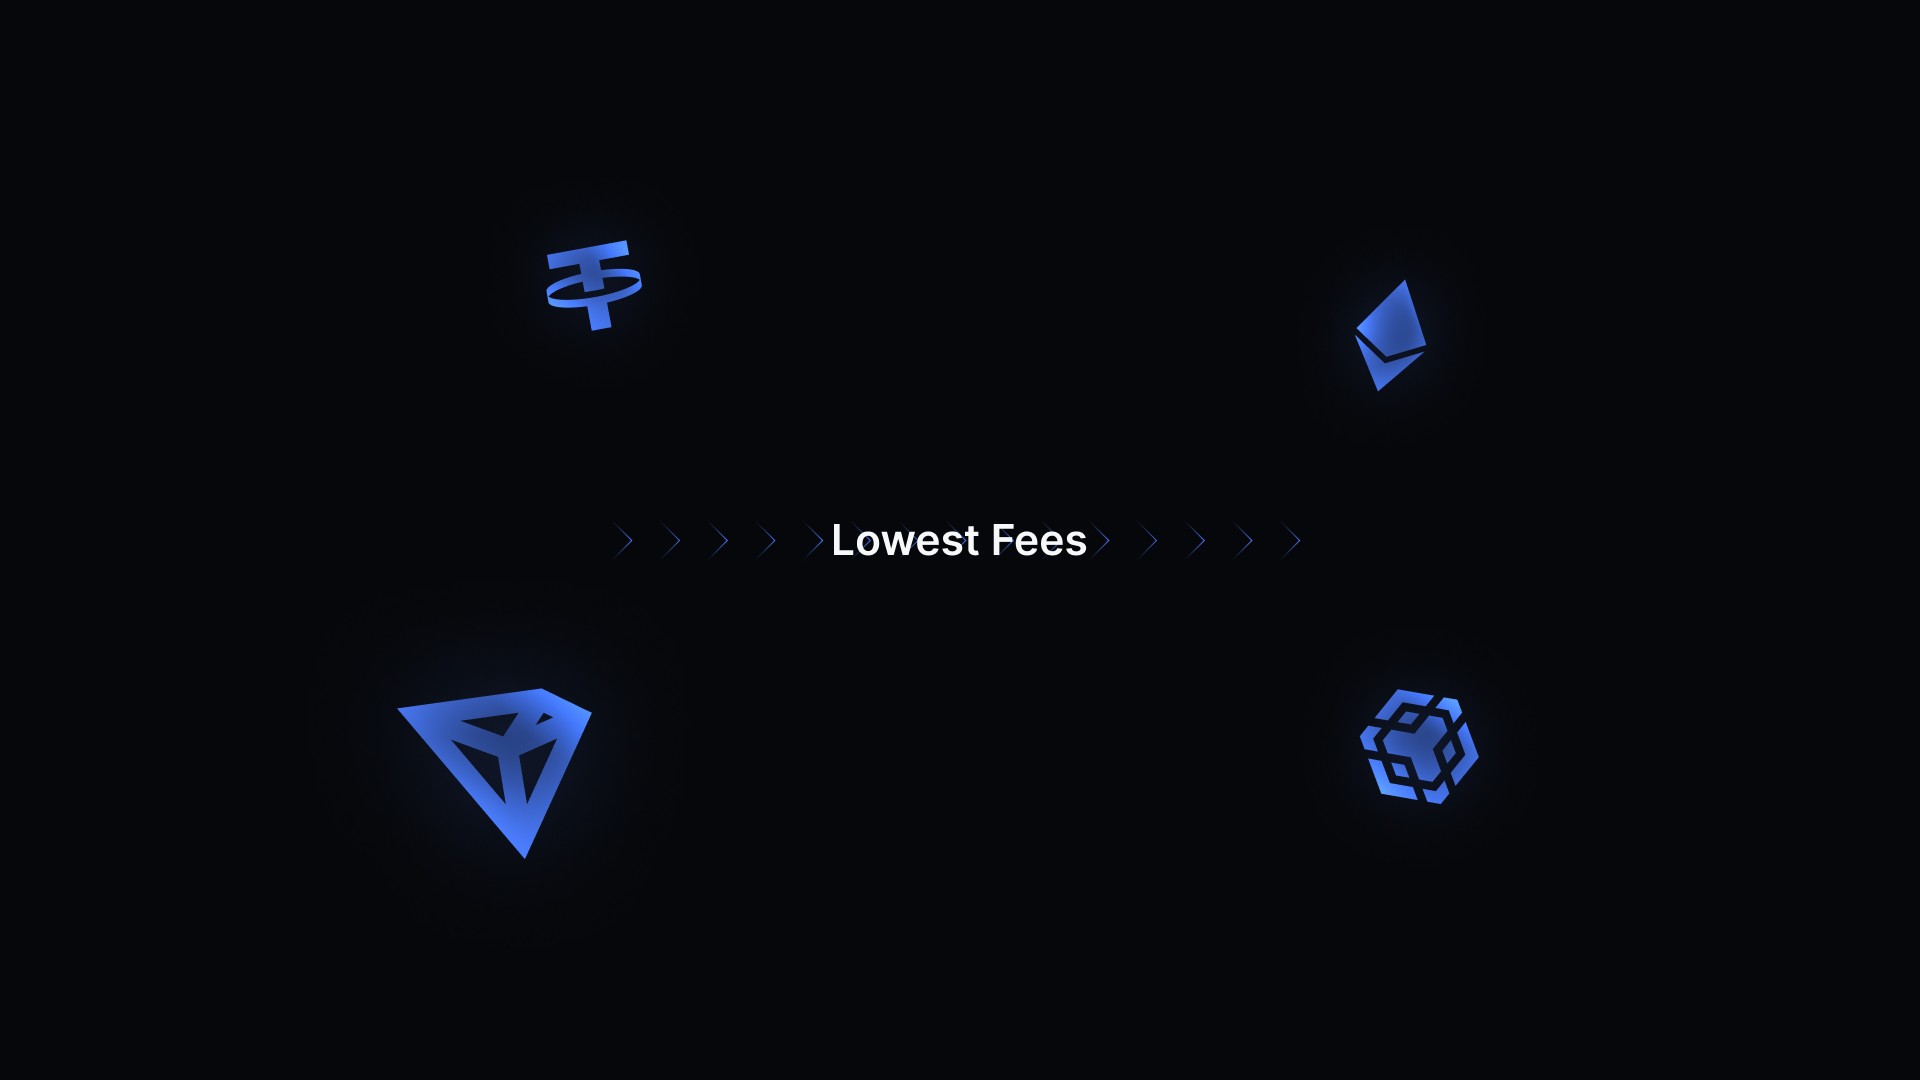 Lowest Gas Fees on Bitcoin Payments: How Tectum is Enabling People Own and Spend Crypto